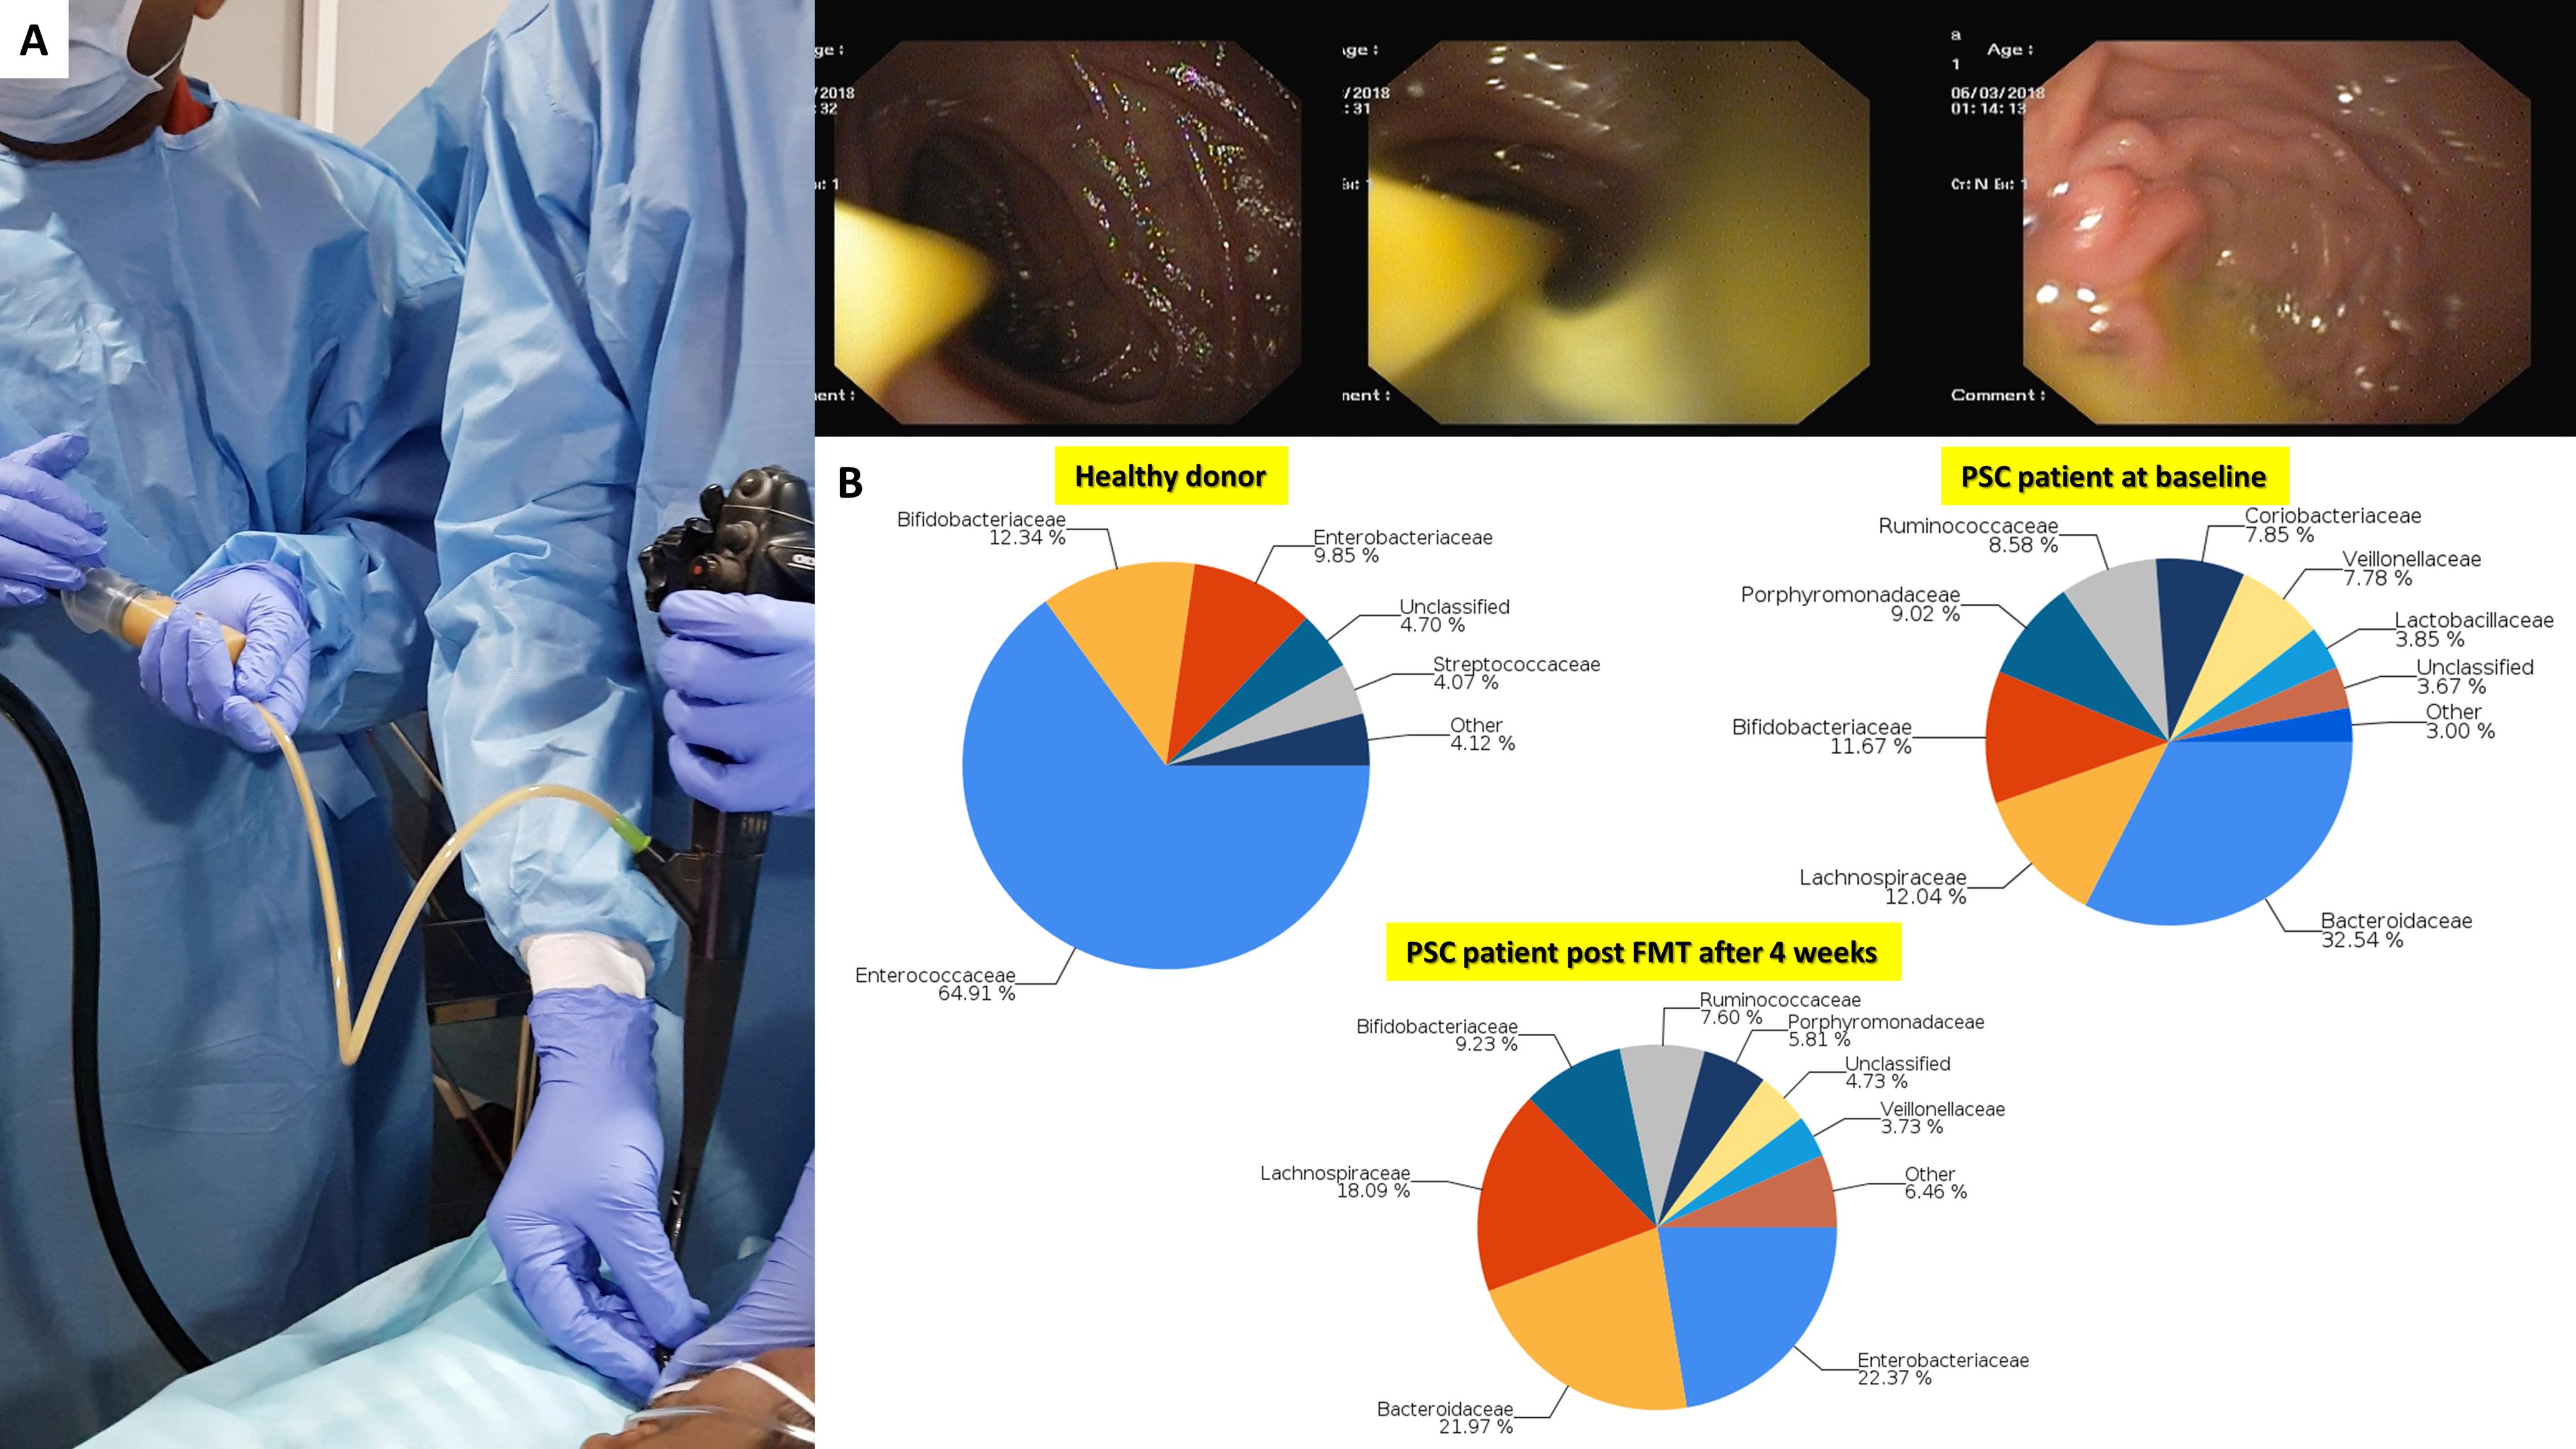 Healthy donor microbiota restitution therapy through upper gastrointestinal endoscopy.